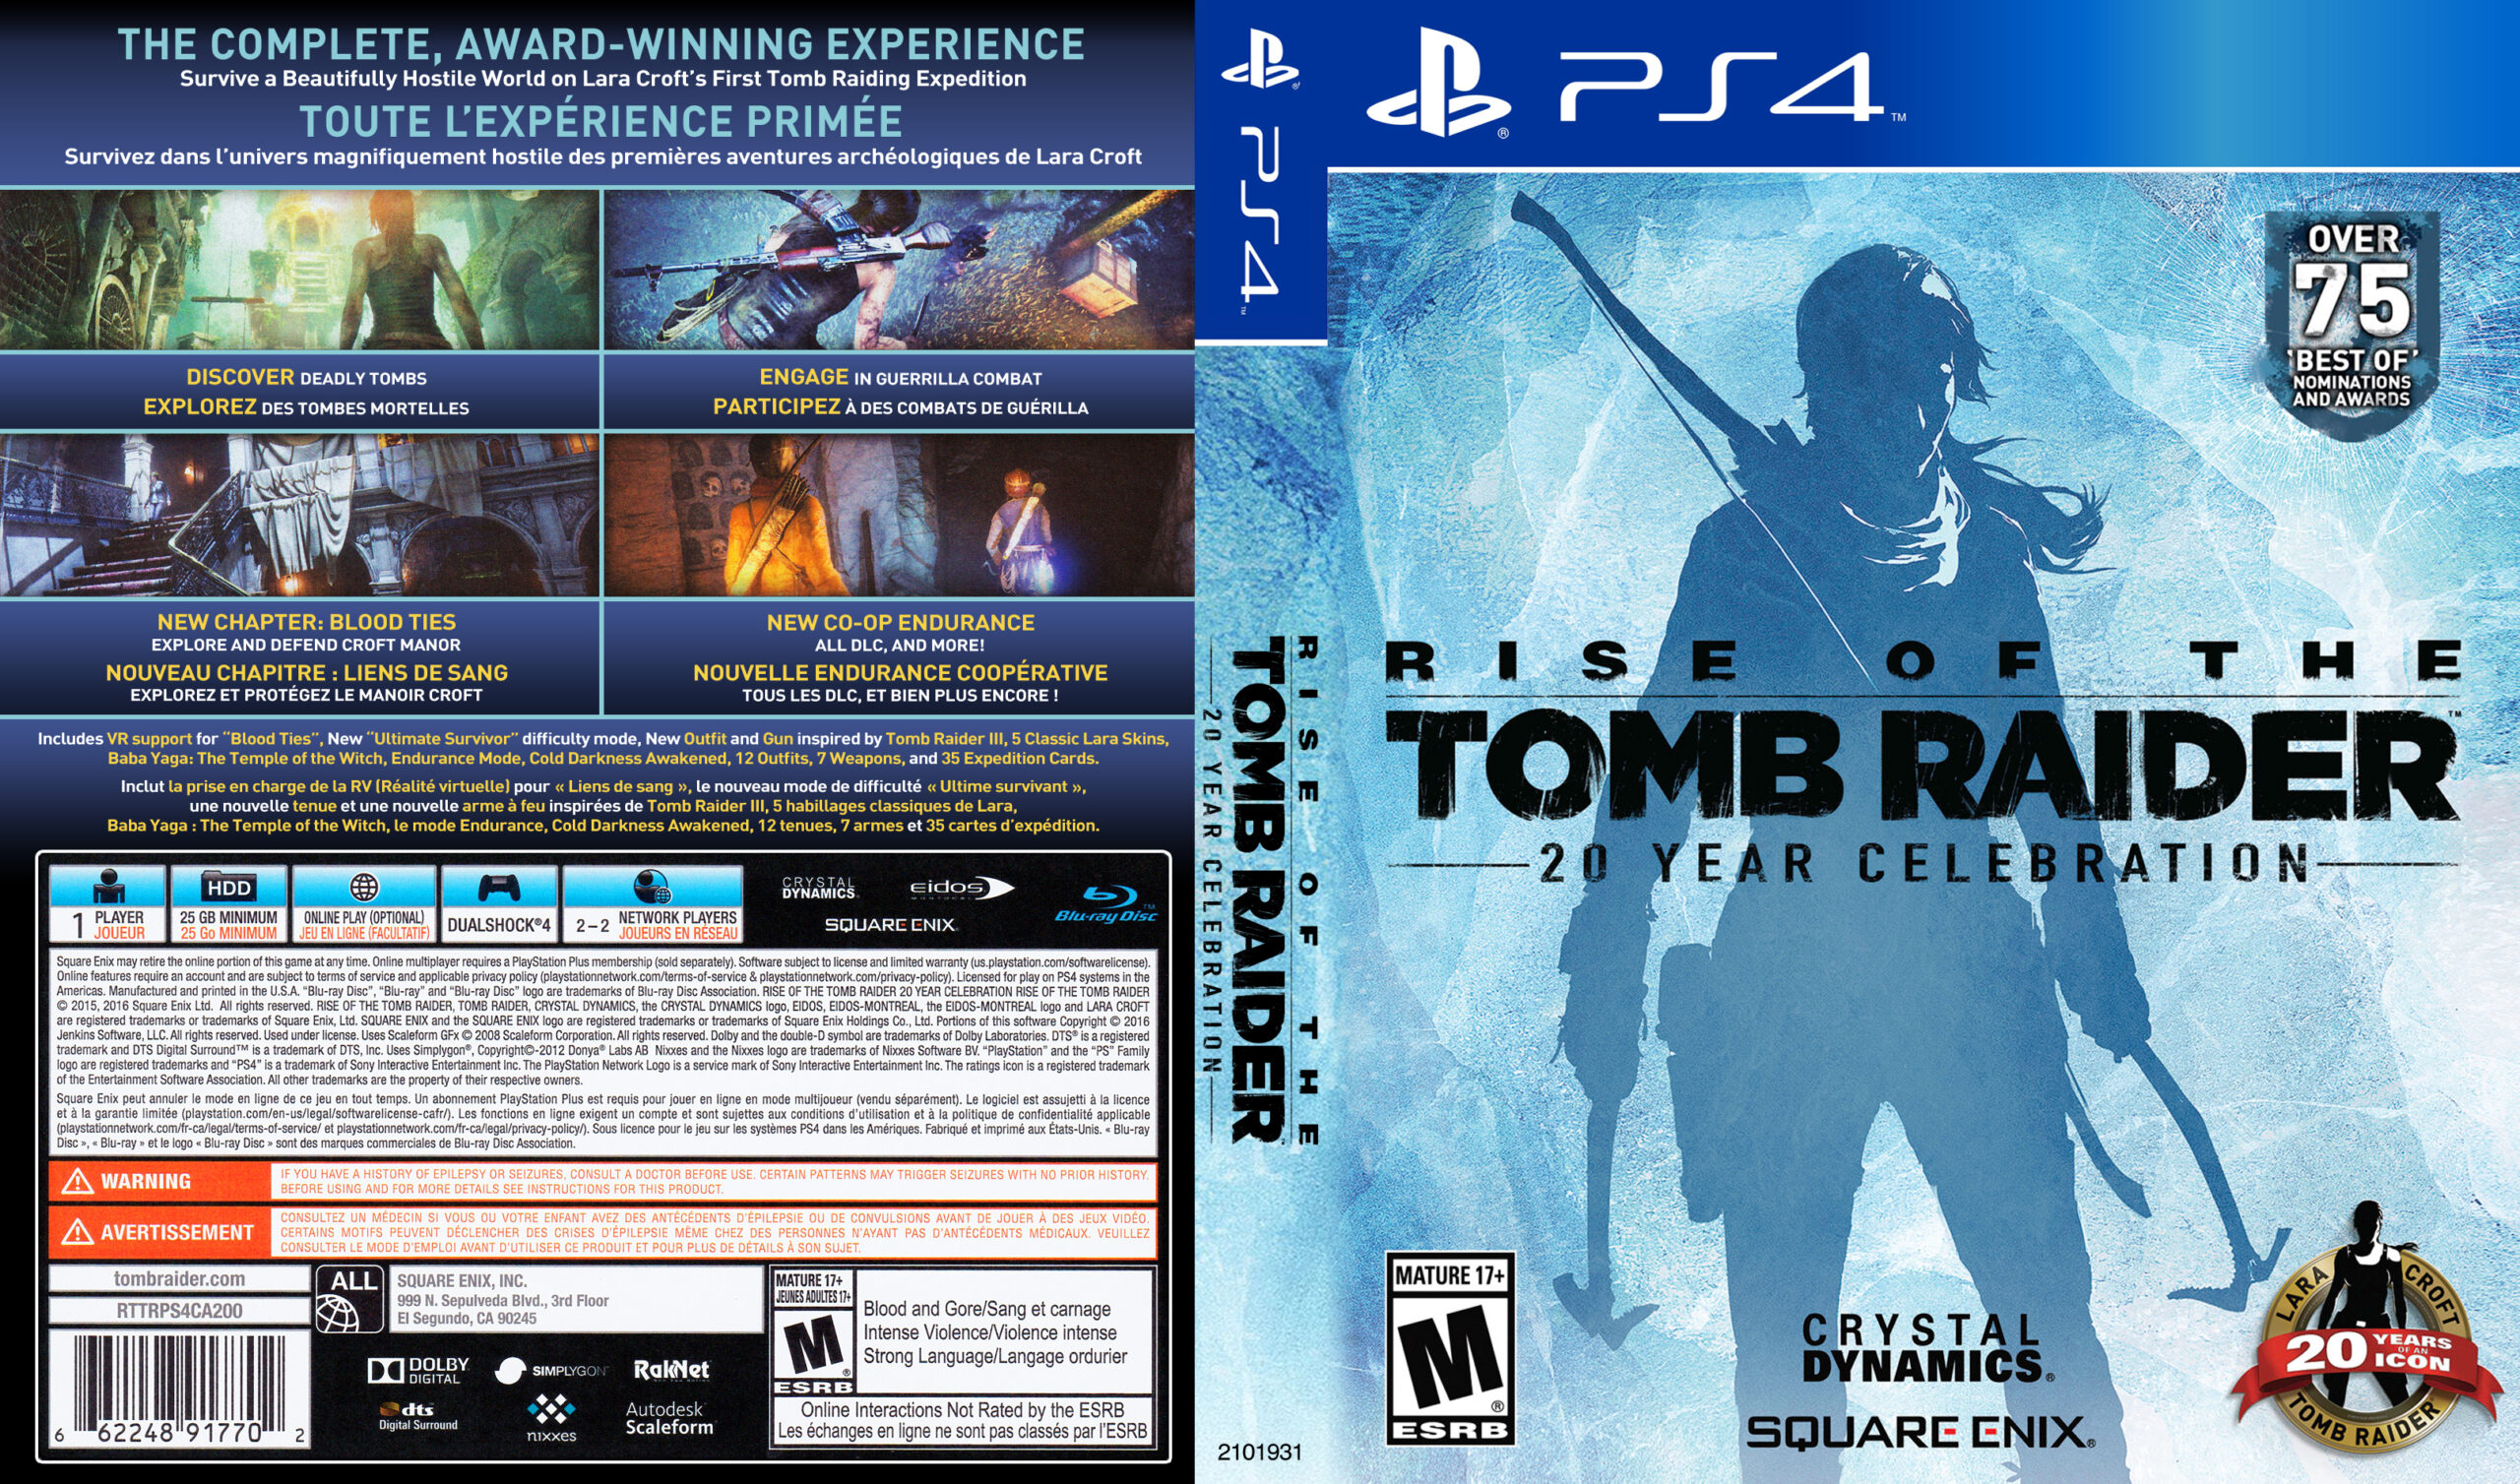 Rise of the Tomb Raider: 20 Year Celebration for windows download free